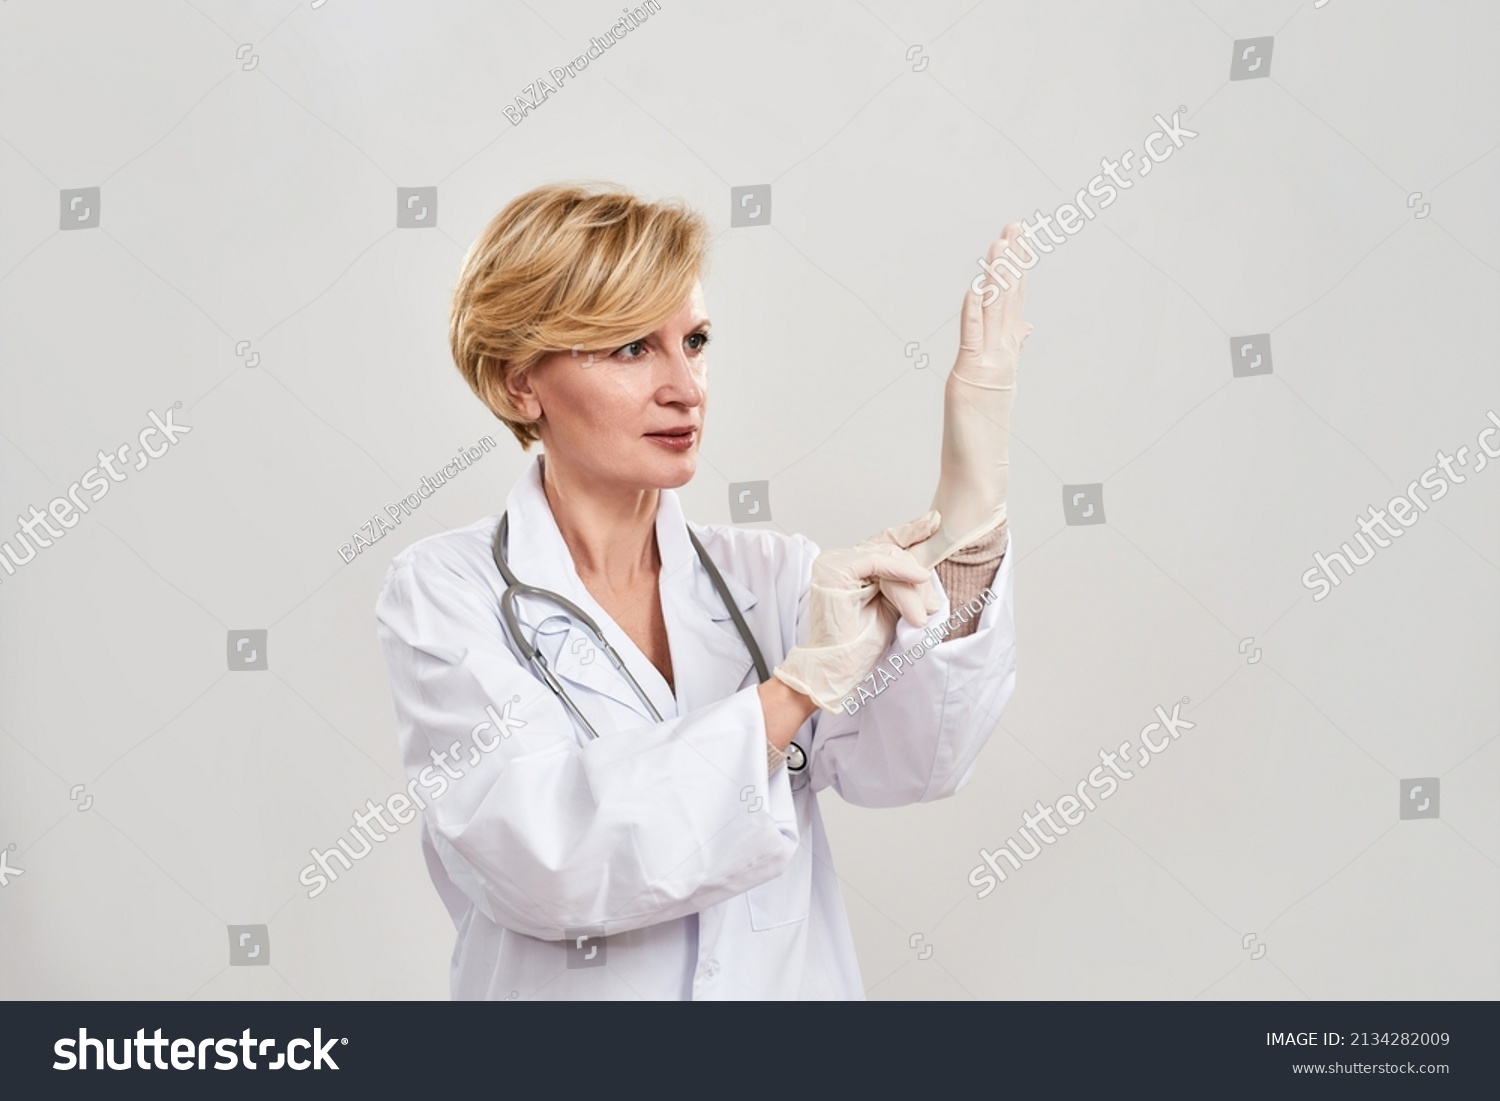 Adult female doctor putting latex glove on her hand. Caucasian woman with stethoscope wearing white coat. Concept of medical and health care. Isolated on white background. Studio shoot. Copy space #2134282009